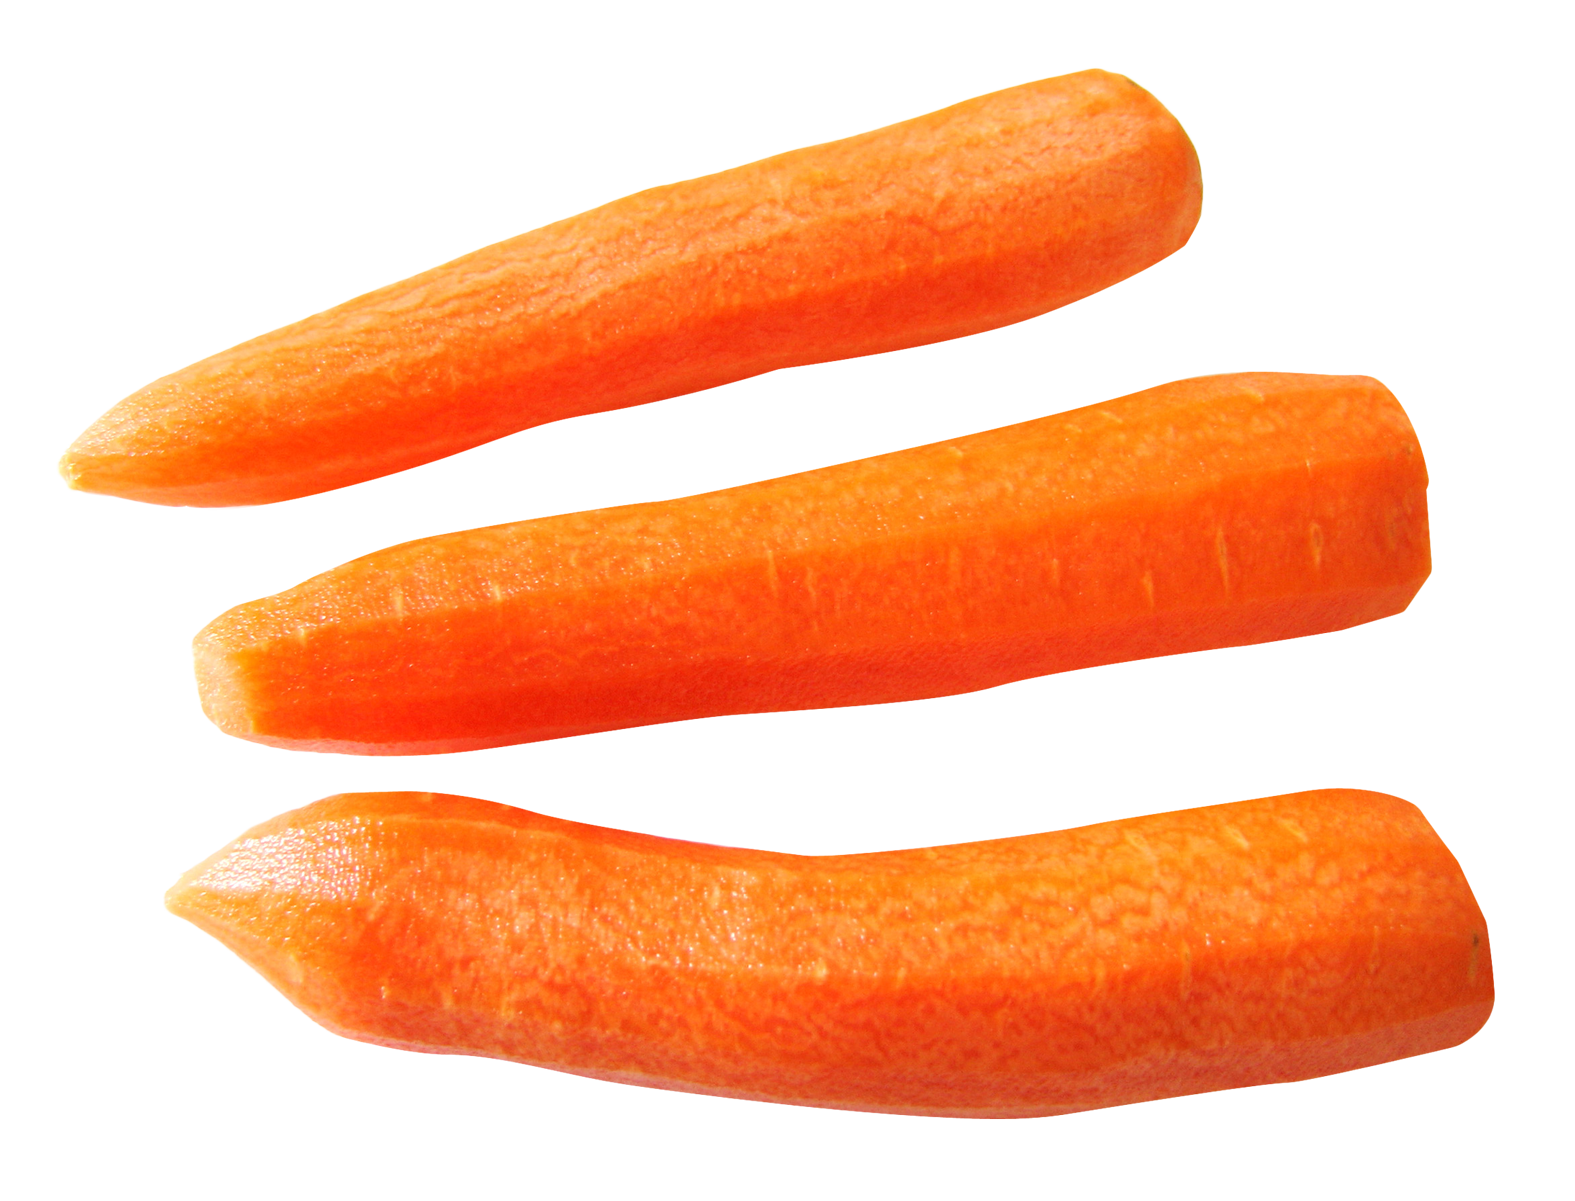 Carrot Slices Download Free Image PNG Image